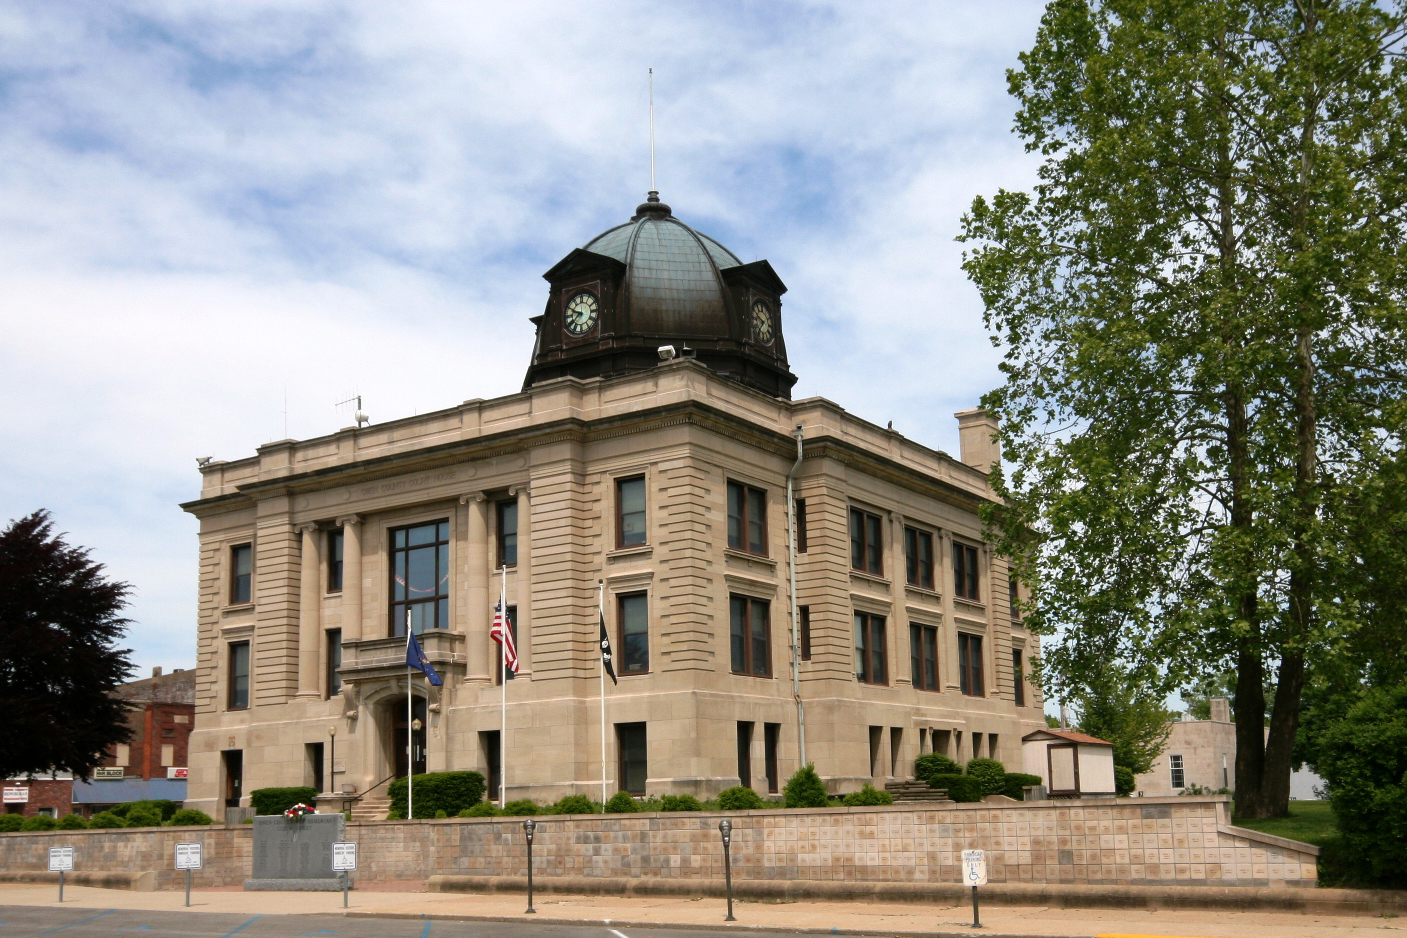 The Owen County Courthouse